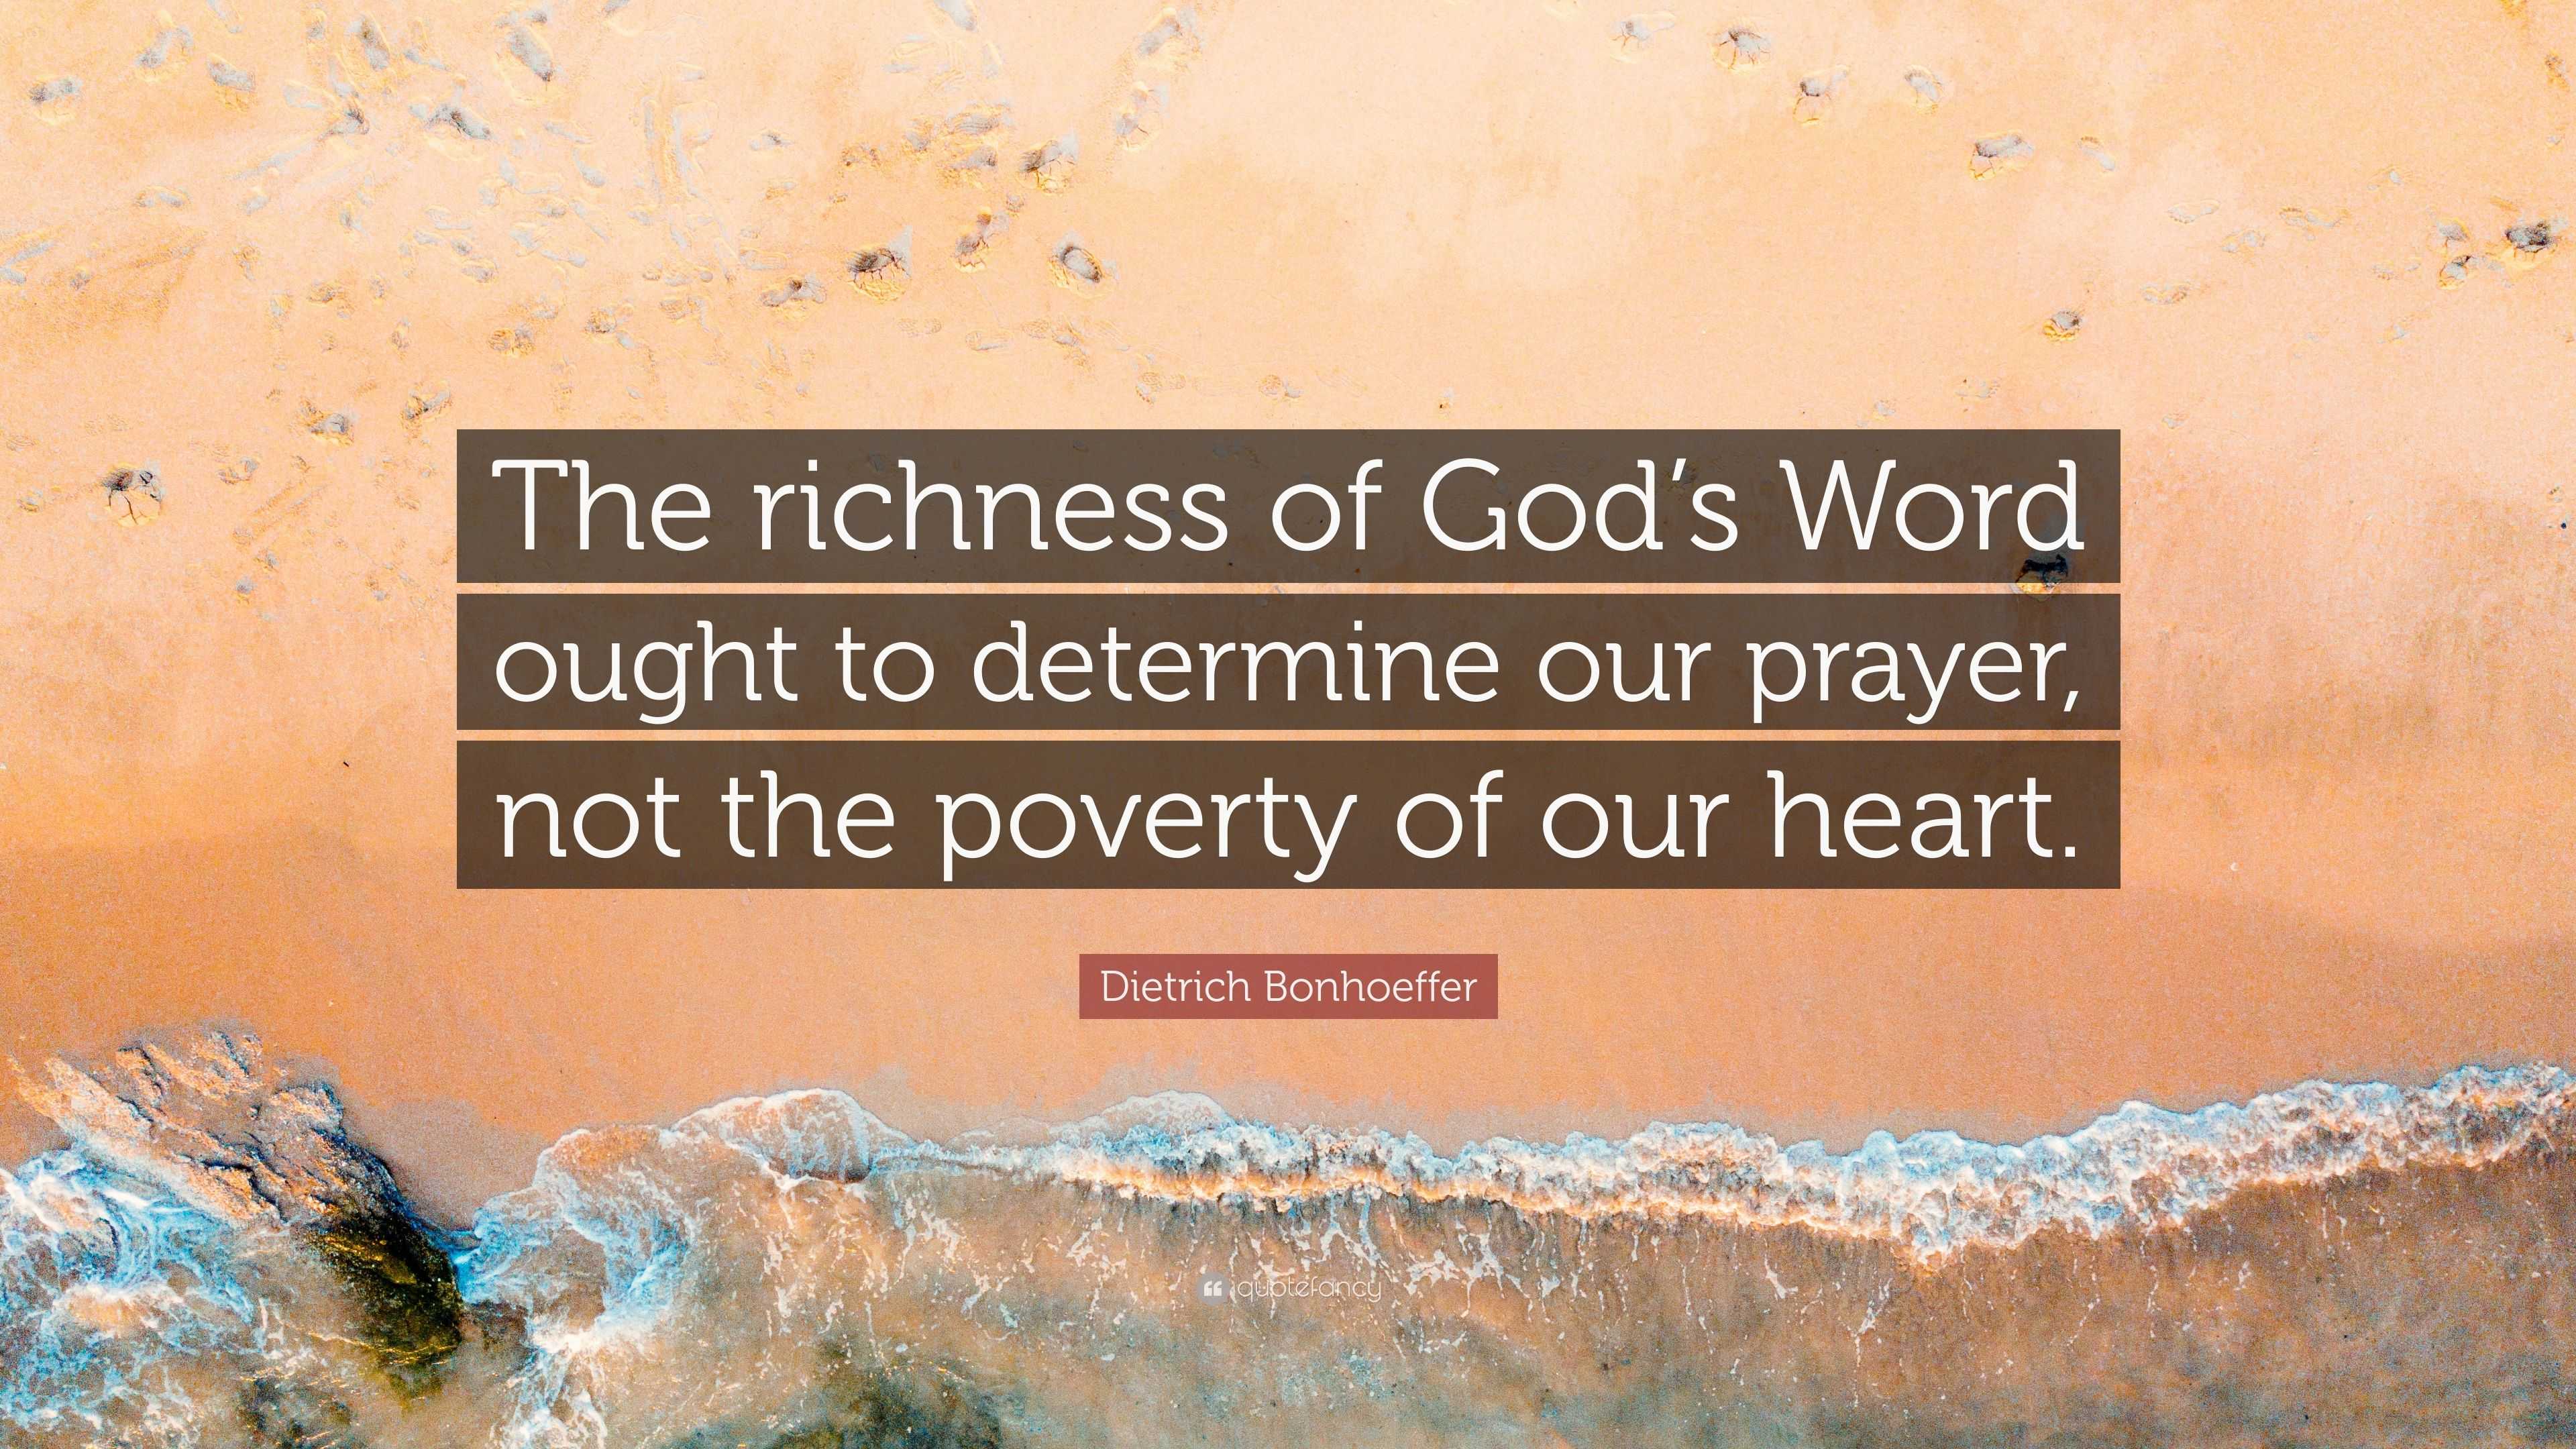 Dietrich Bonhoeffer Quote: “The richness of God's Word ought to determine  our prayer, not the poverty